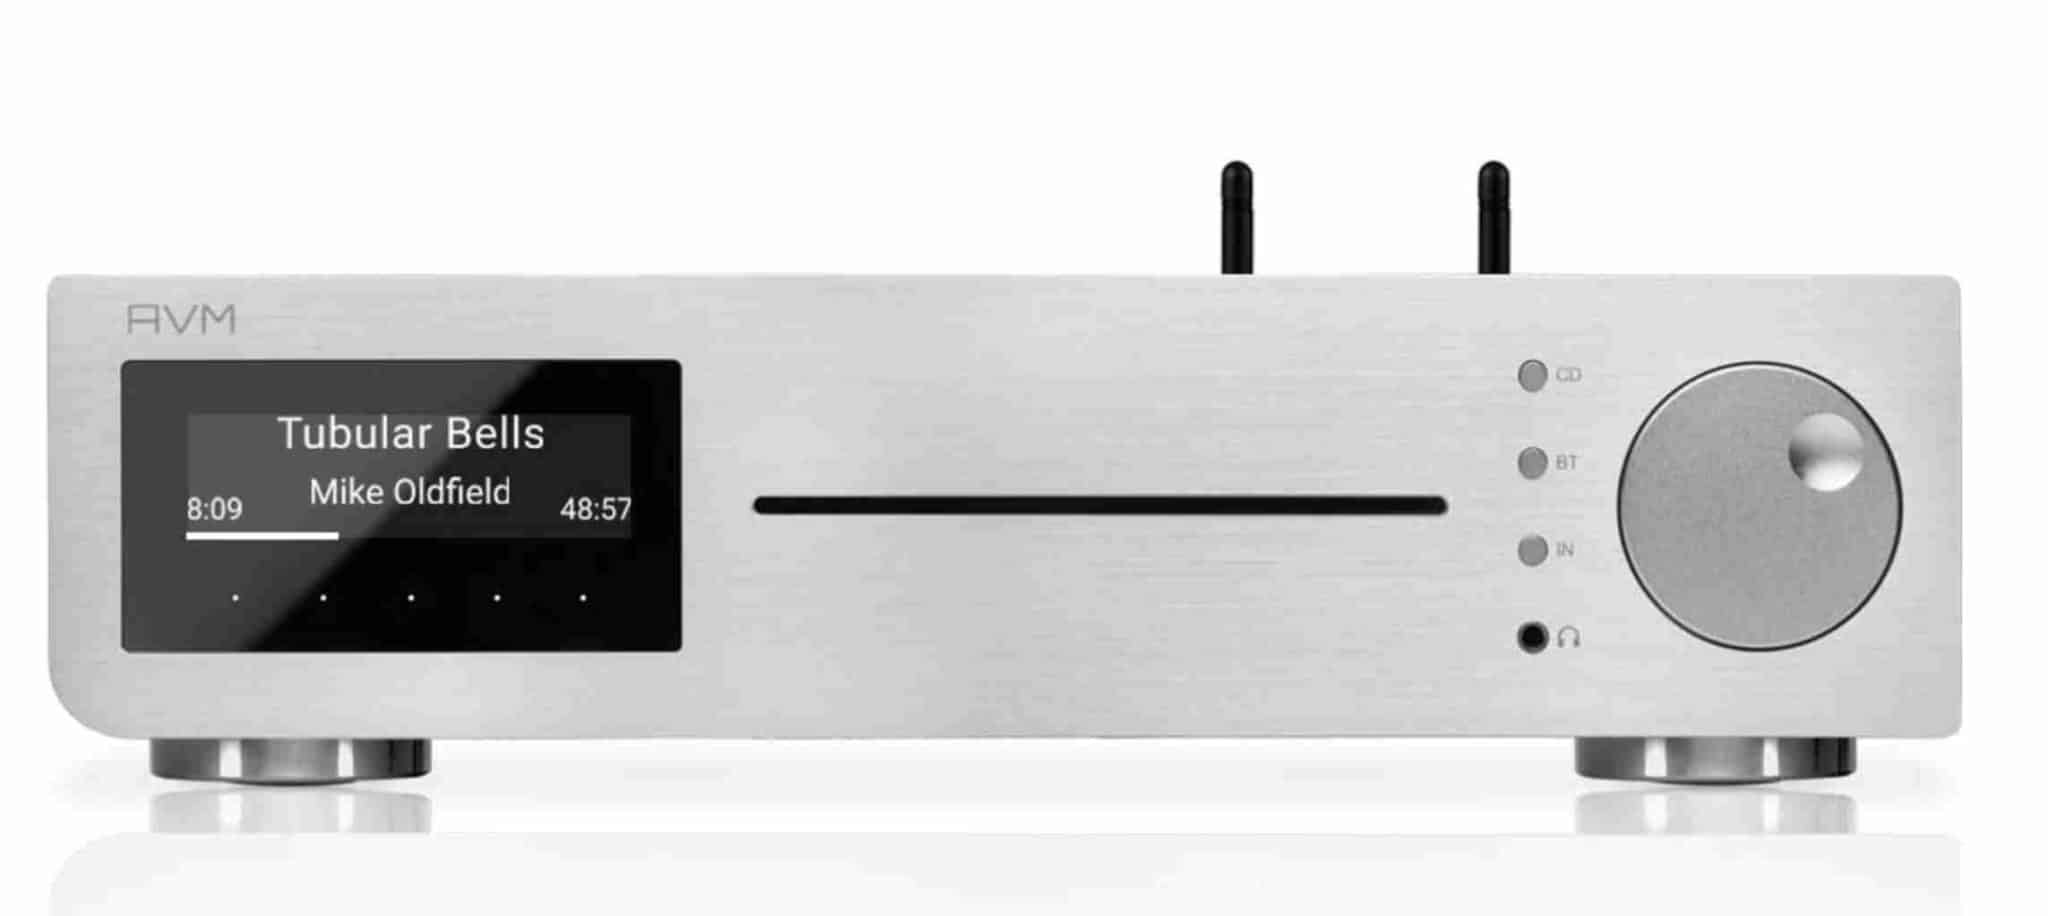 Essence Network Player From 432 EVO - The Audiophile Man